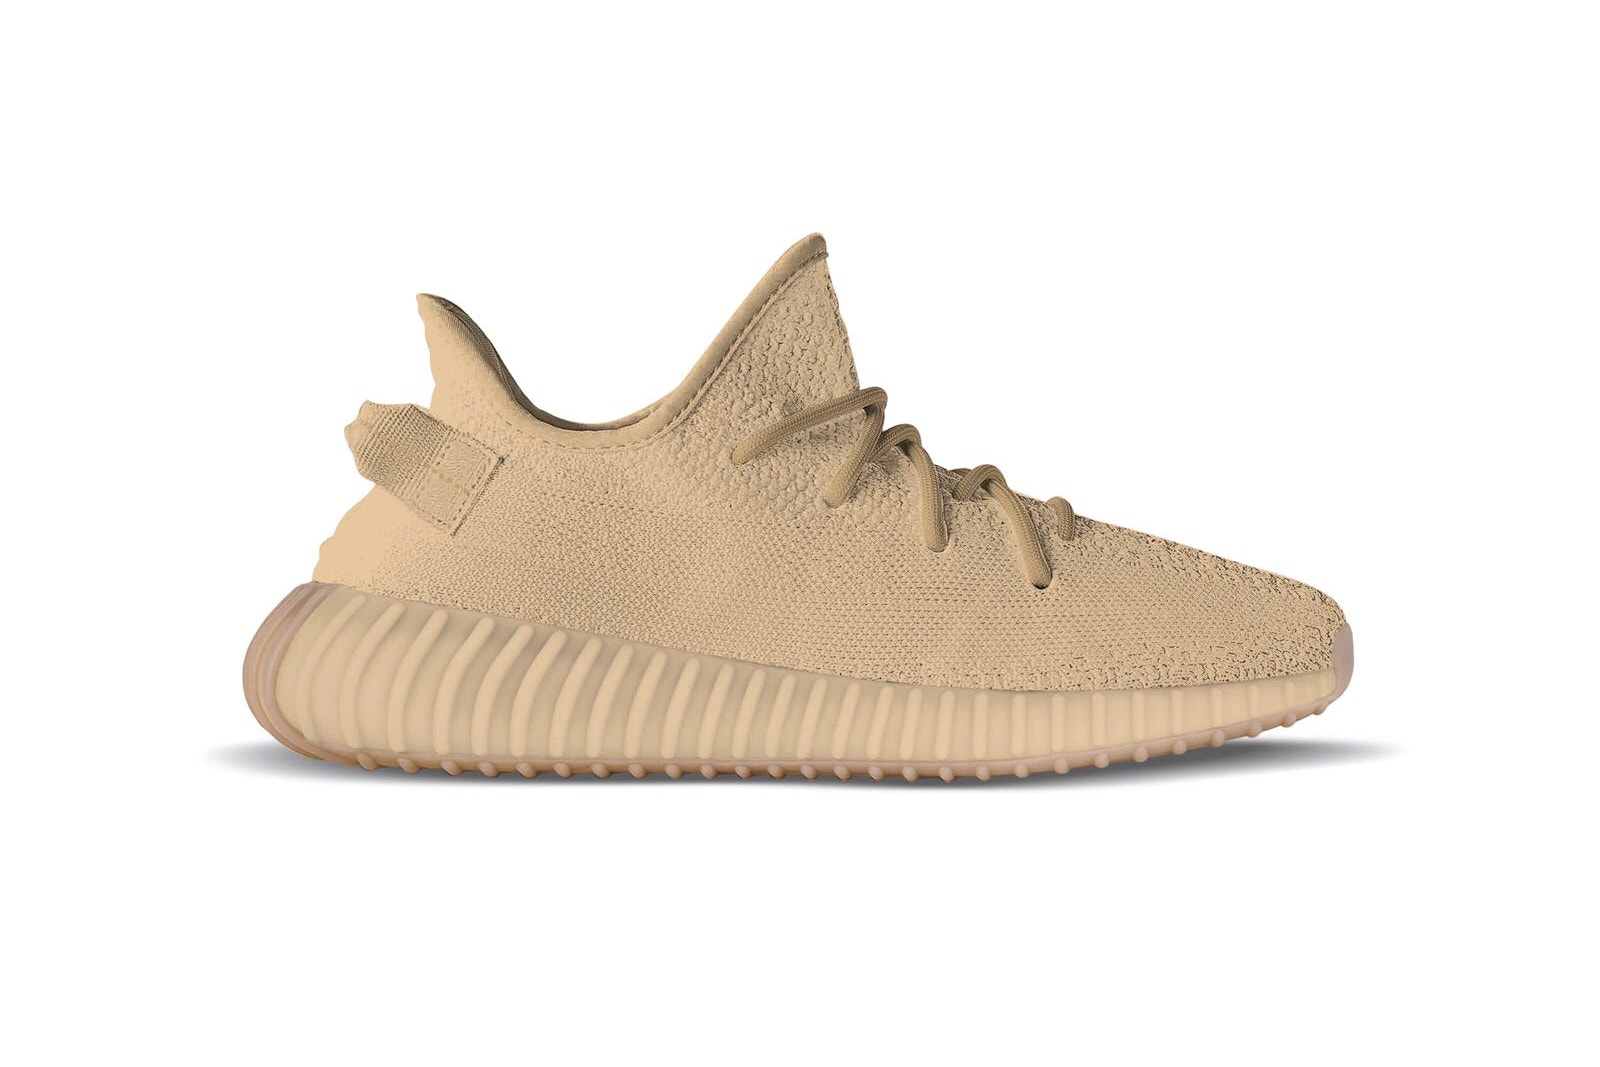 adidas originals yeezy boost 350 v2 kanye west peanut butter release leak info 2018 where to buy